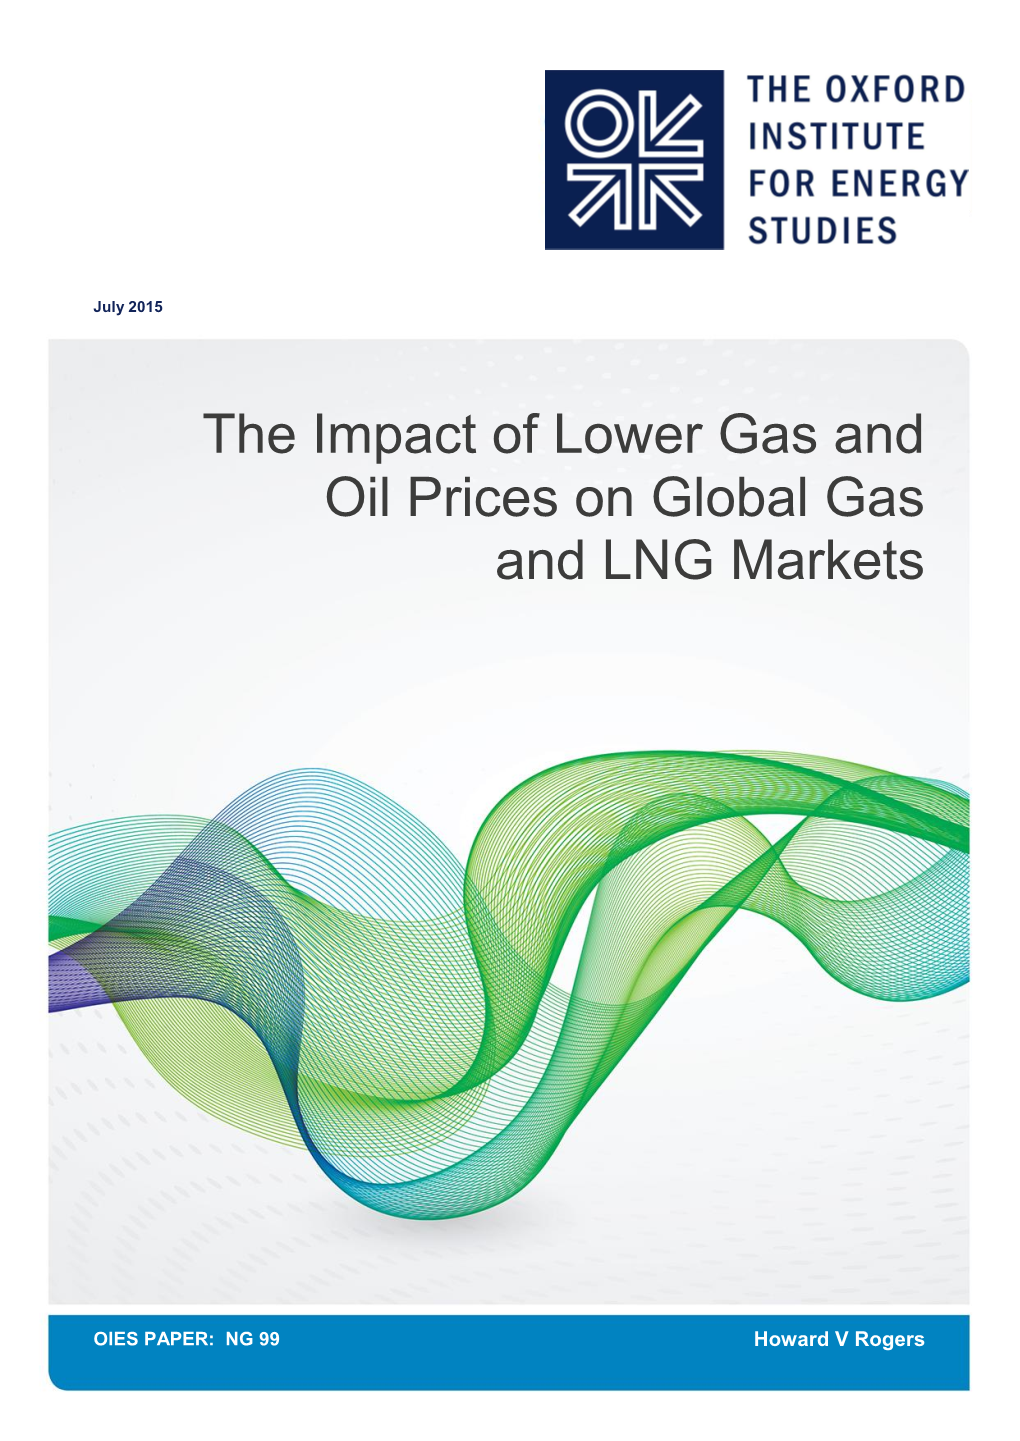 The Impact of Lower Gas and Oil Prices on Global Gas and LNG Markets